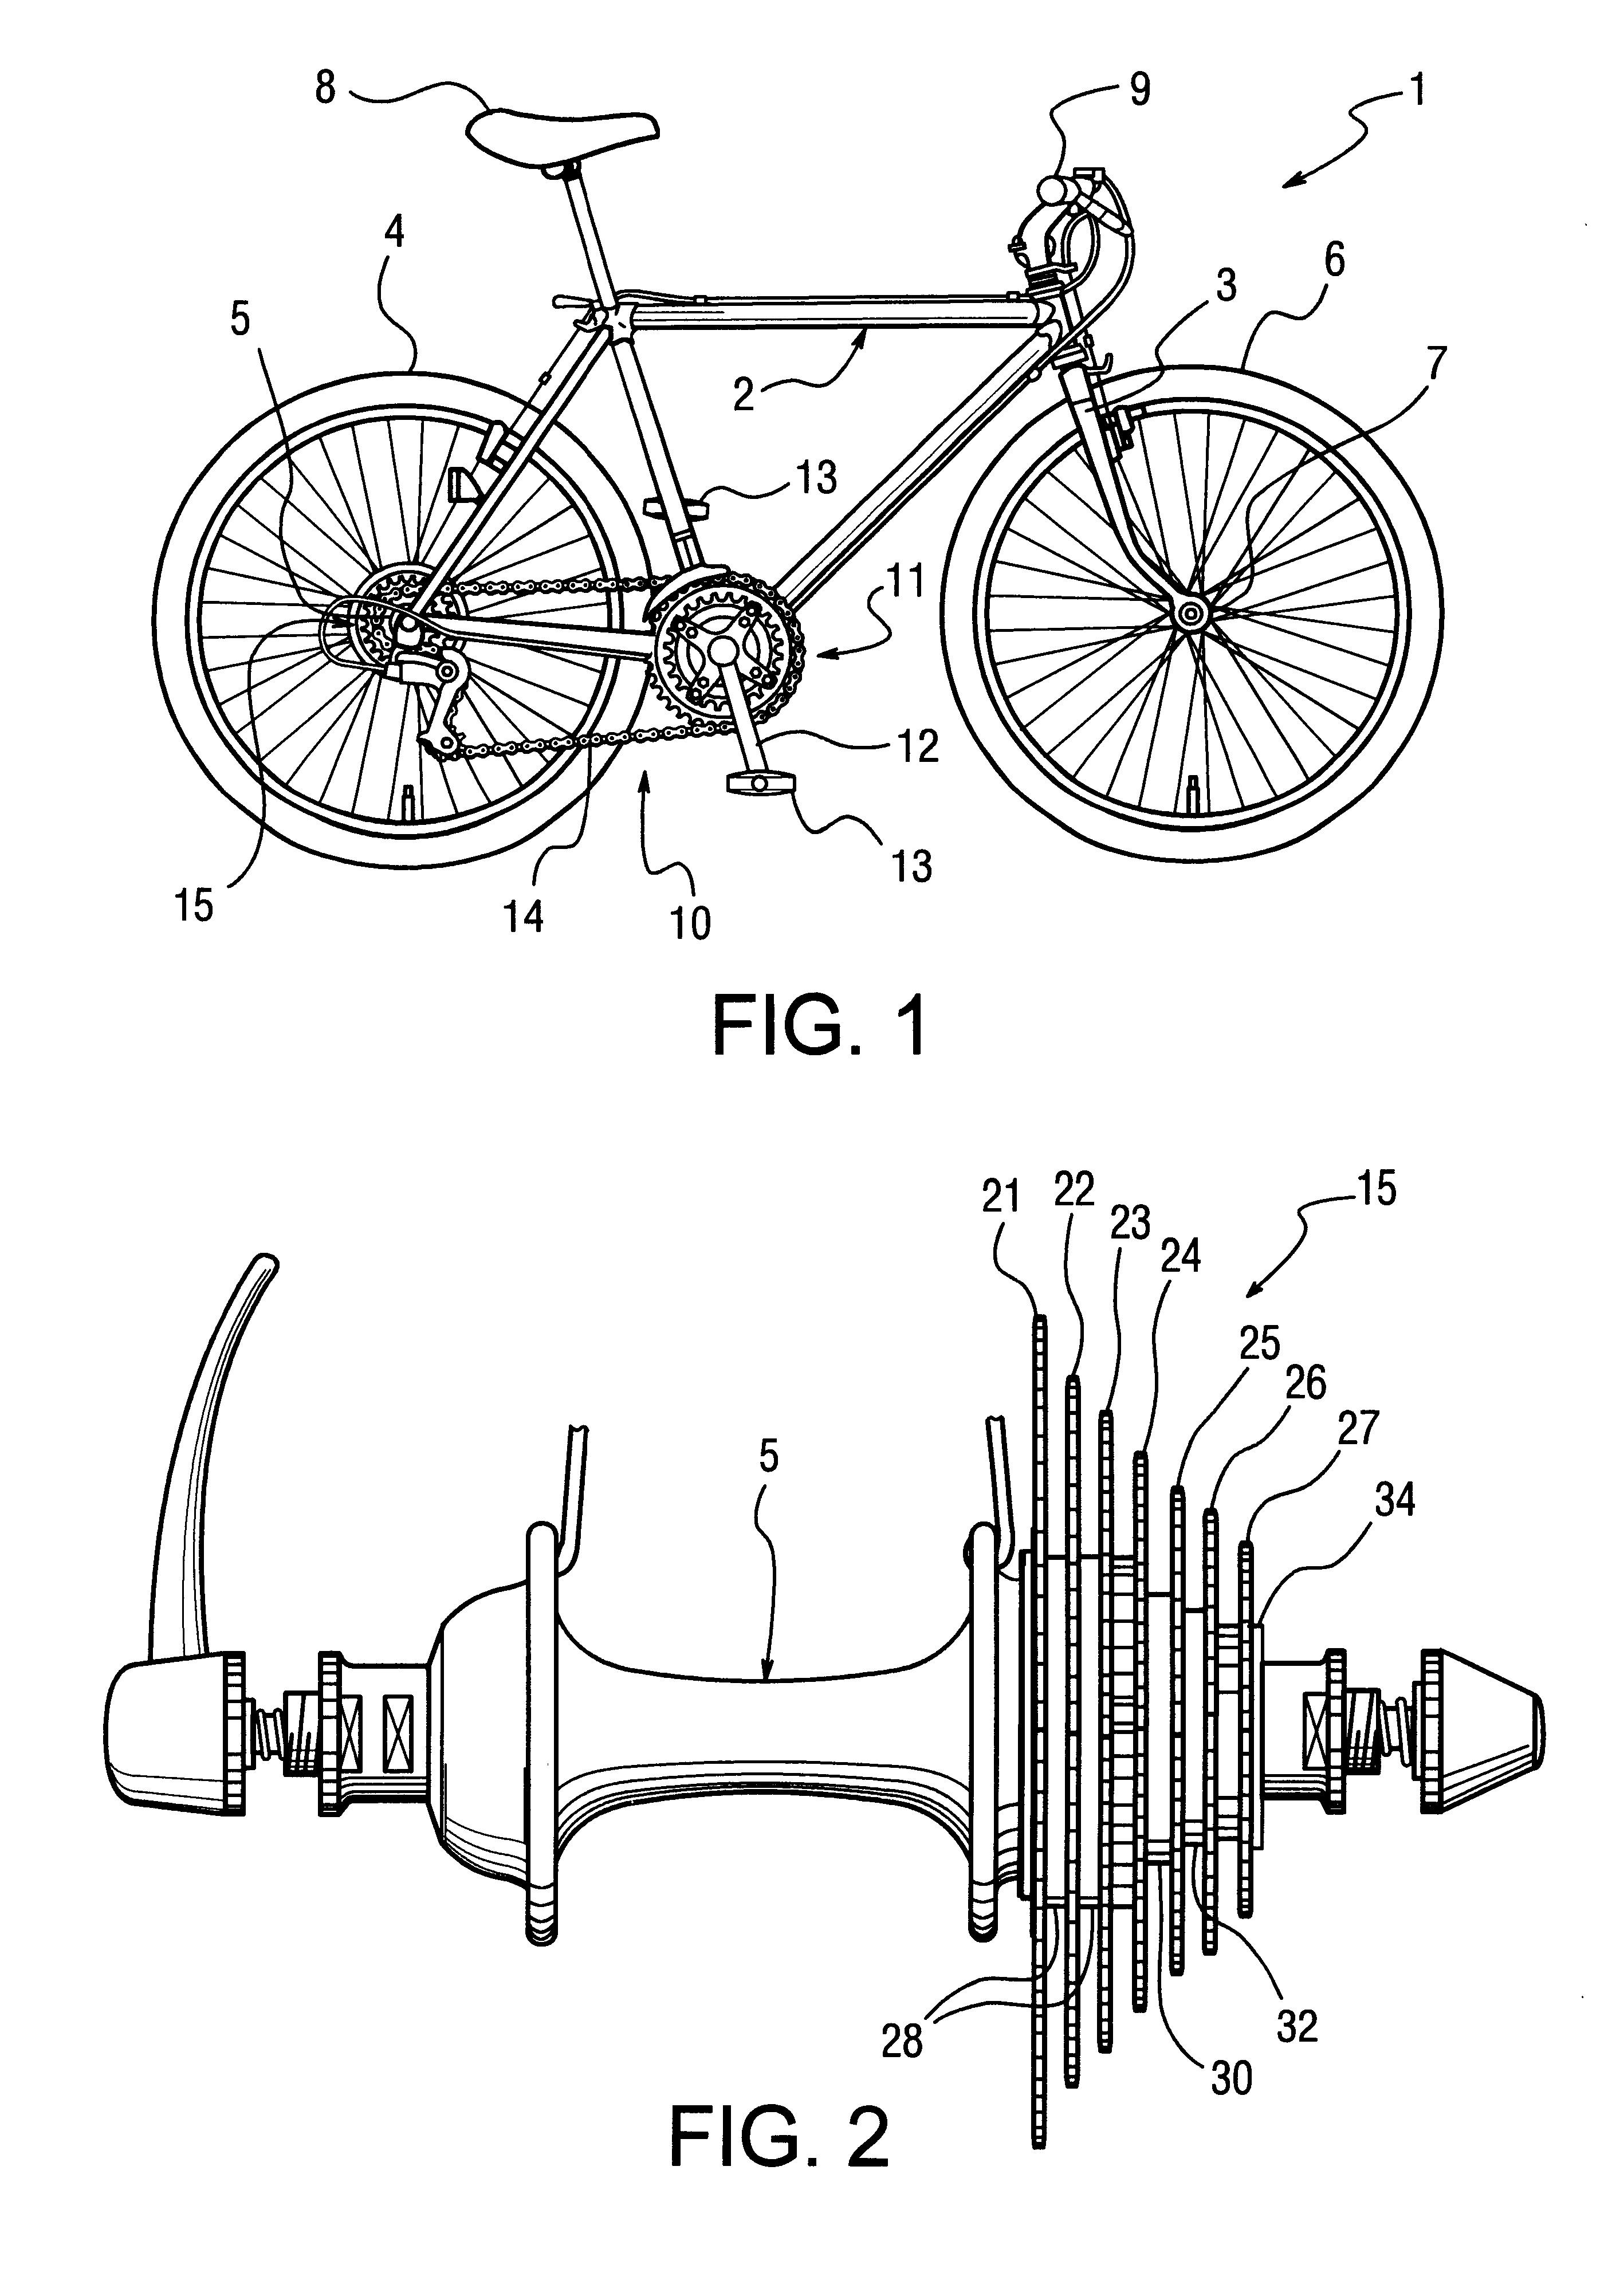 Freewheel for a bicycle